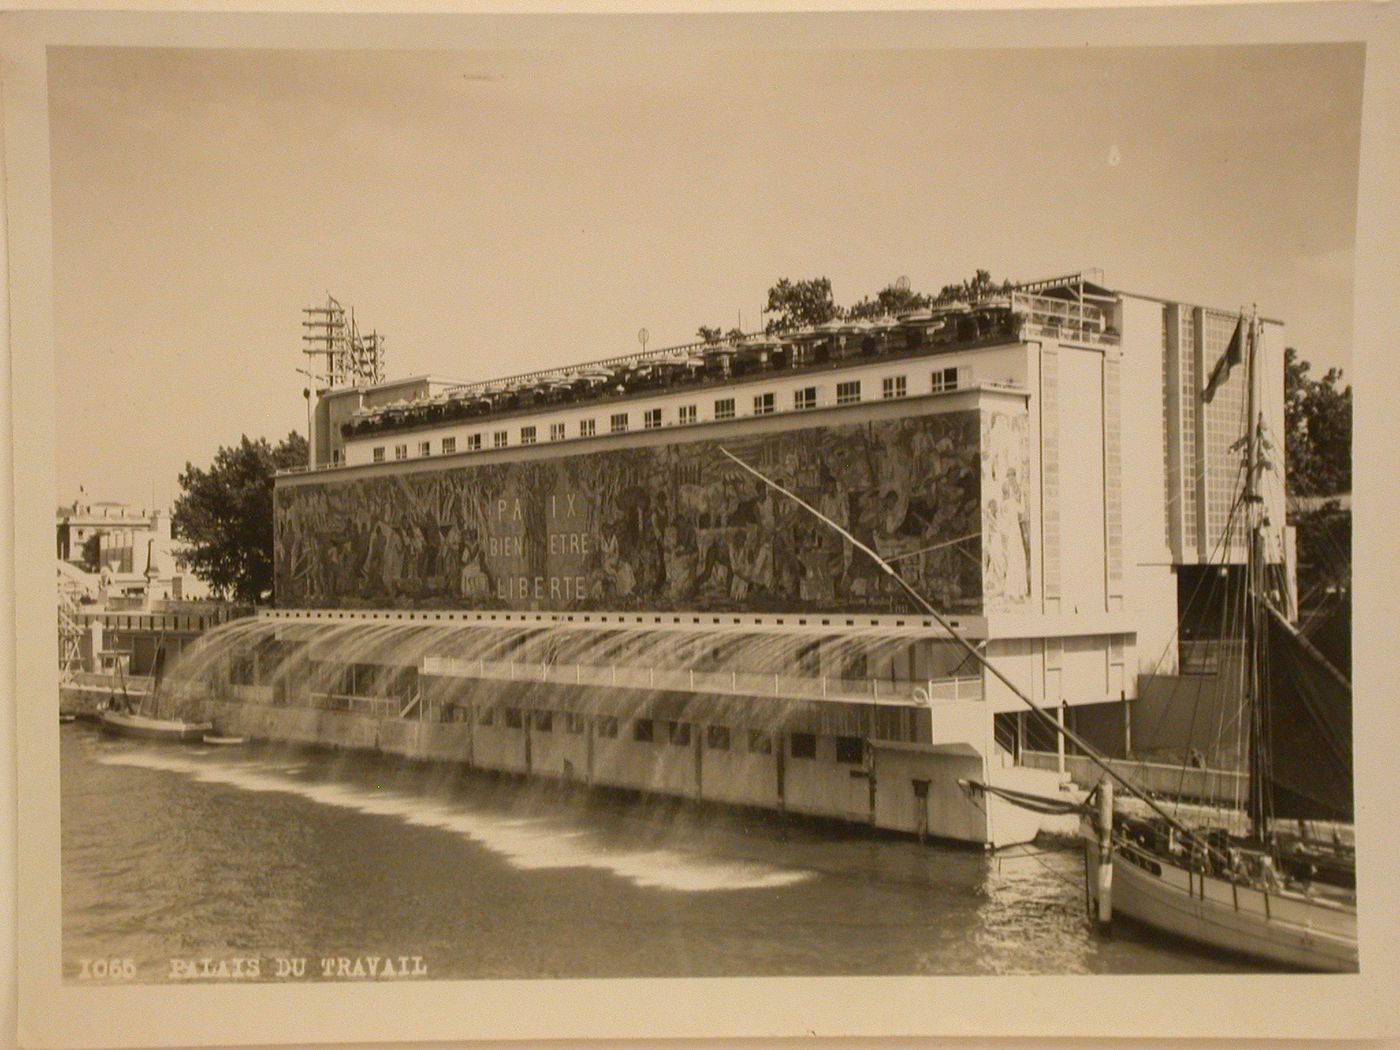 View of the Pavillon du Travail (also known as the Palais du Travail) with the Seine in the foreground, 1937 Exposition internationale, Paris, France